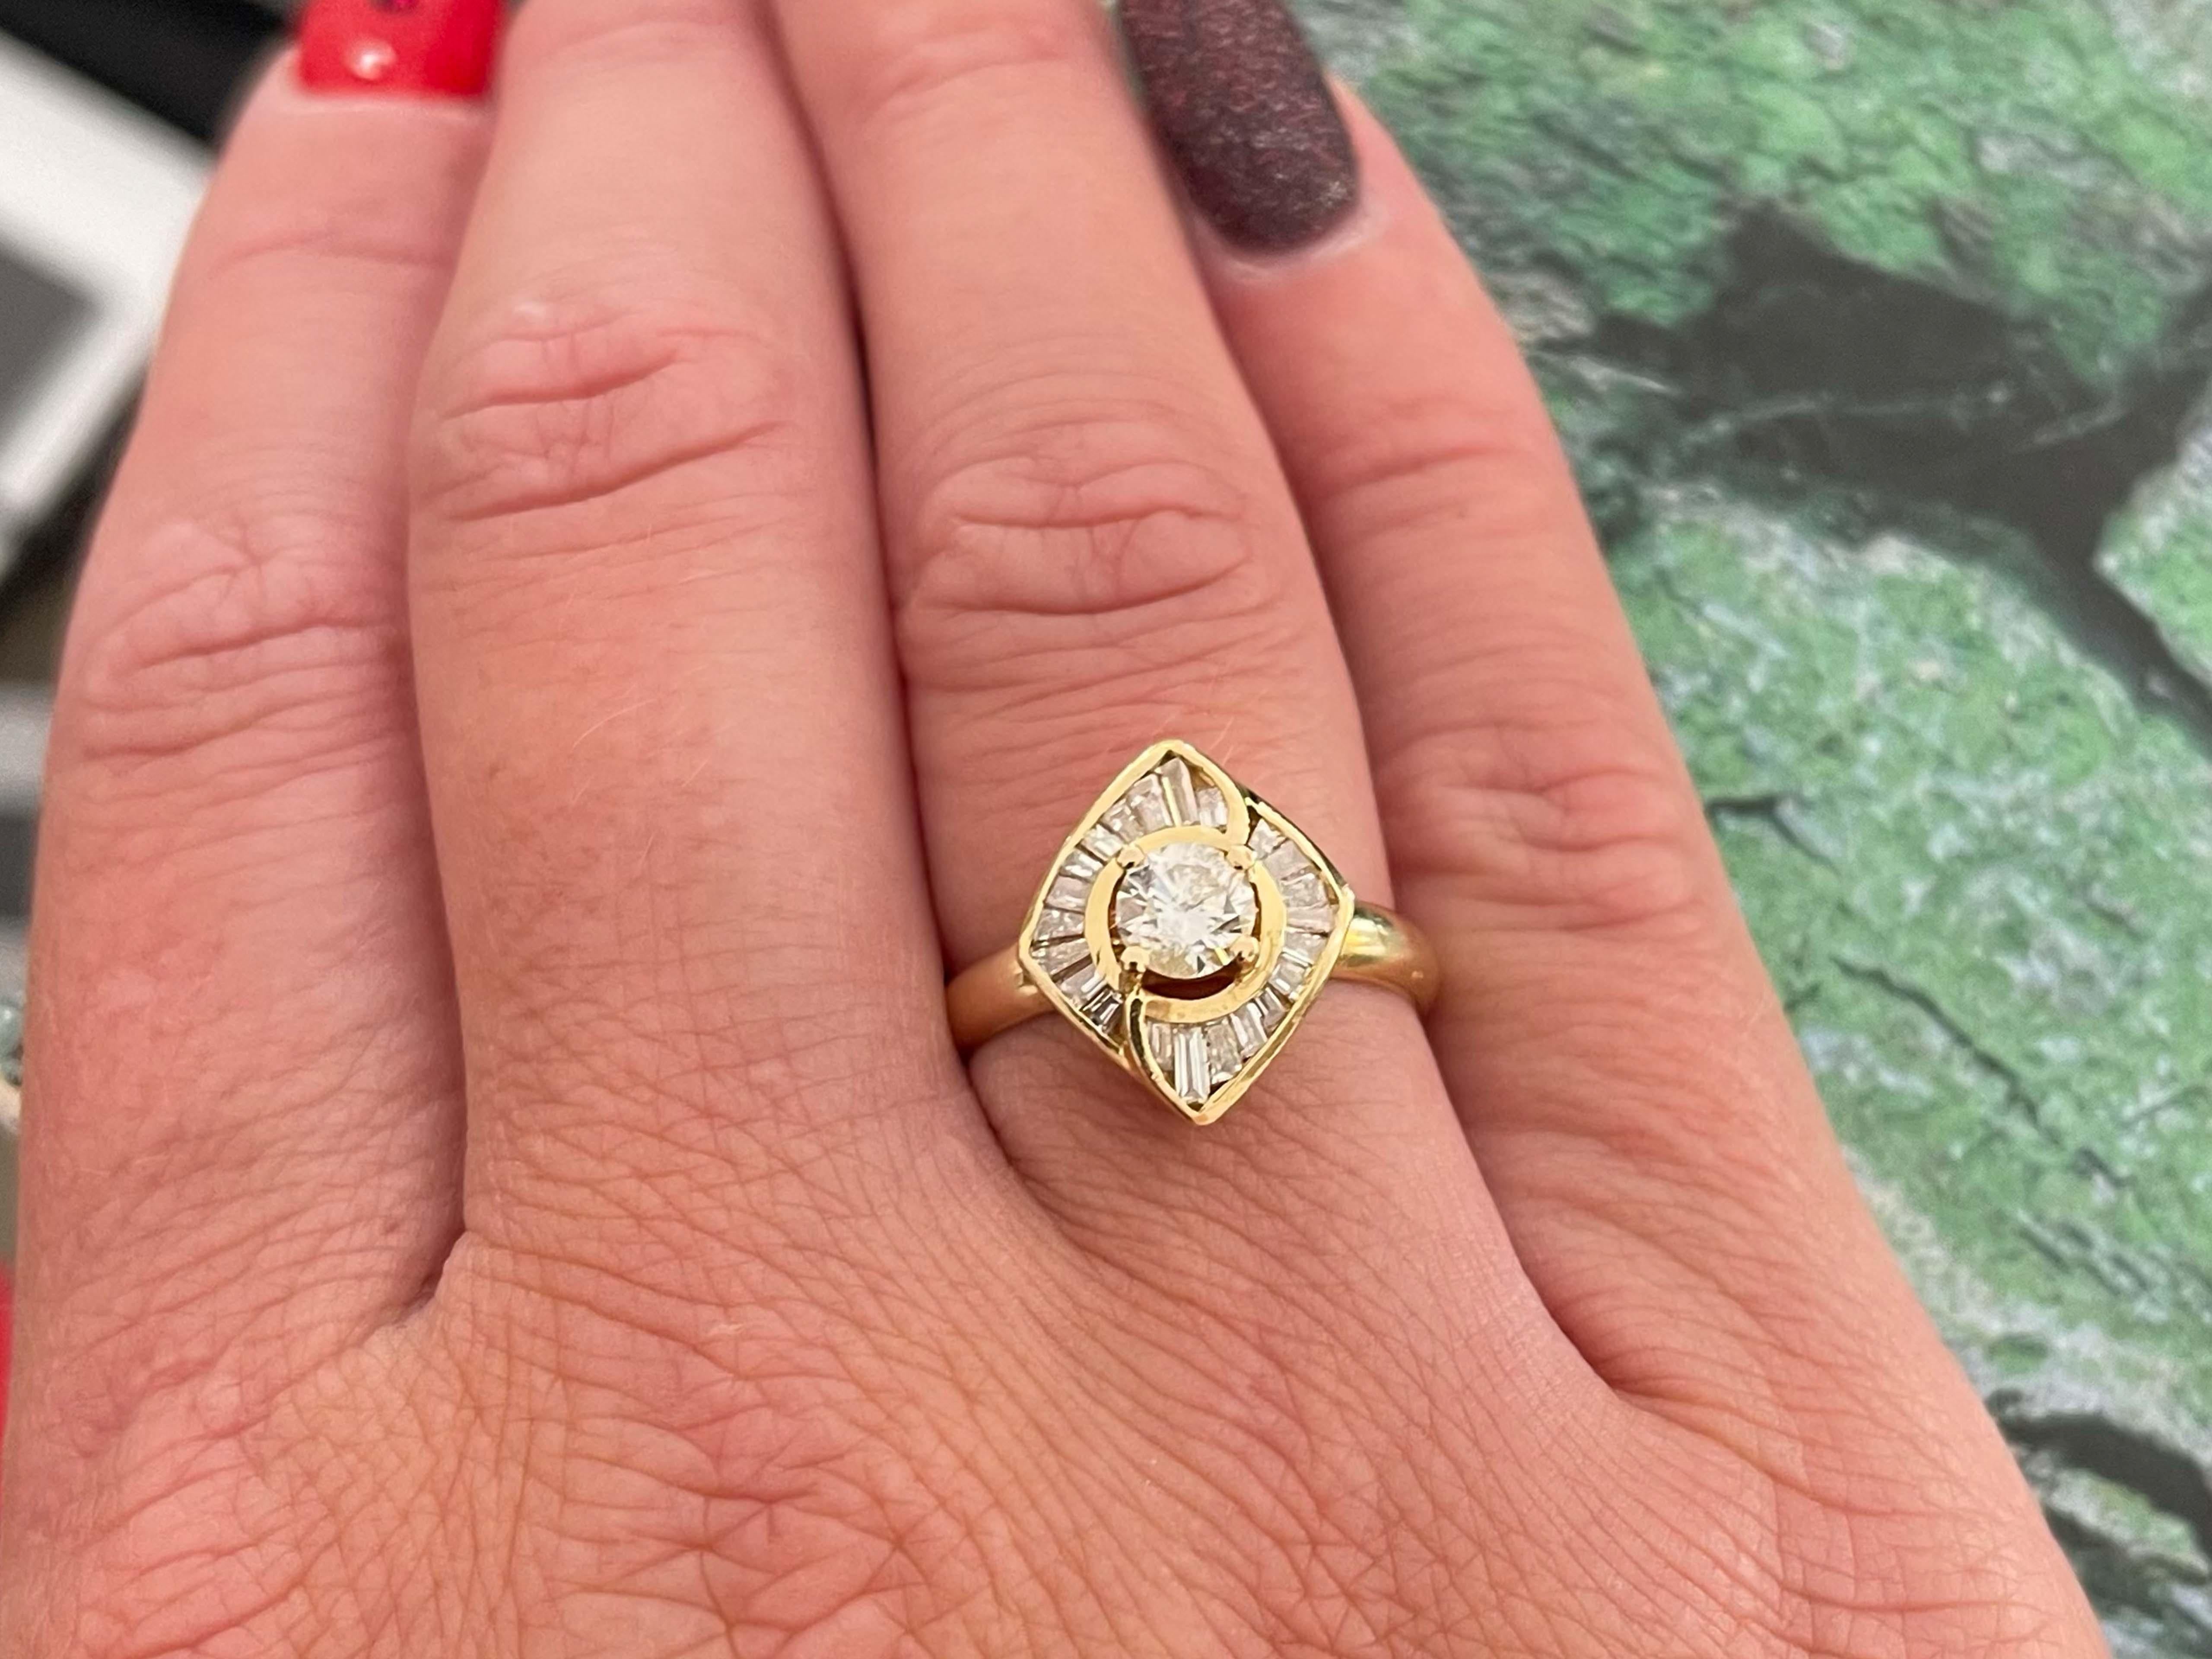 This gorgeous ring features a prong set round brilliant cut diamond in the center, H color and I1 clarity totaling 0.45 carats. Around this diamond are 22, channel set, baguette diamonds forming a diamond shape. These diamonds are H-I color and